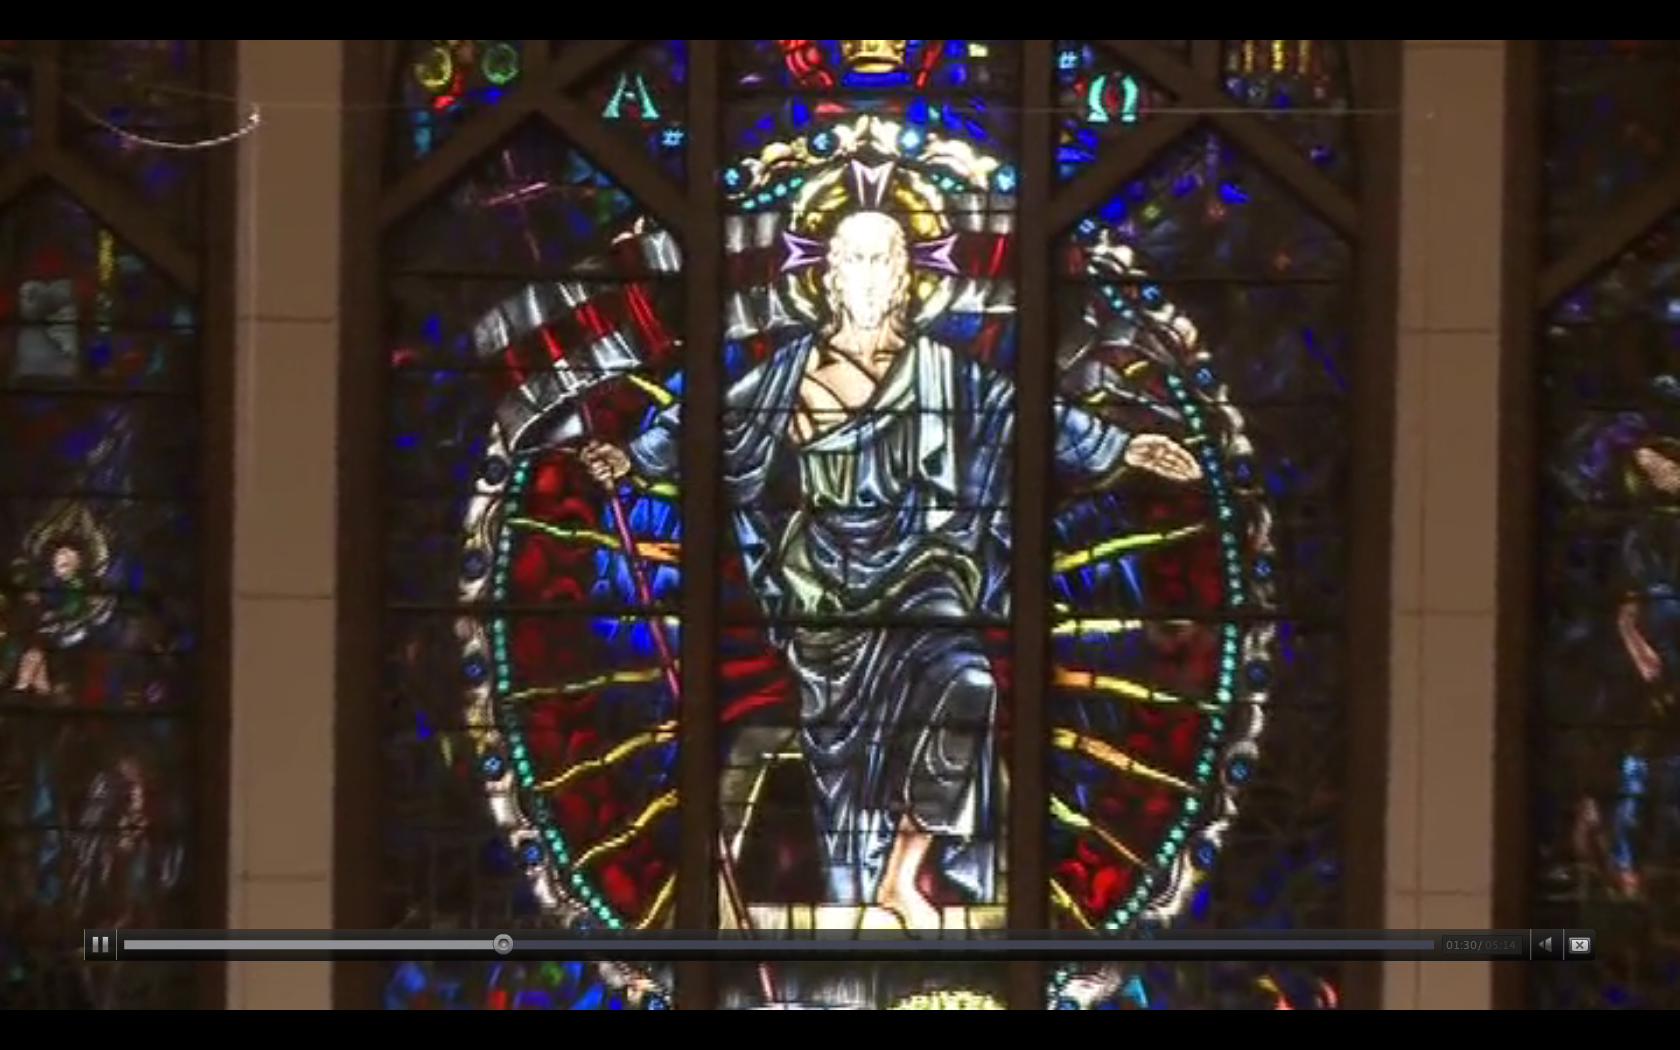 Stained Glass Window at 1st Presbyterian Chruch stain glass | The Bible ...